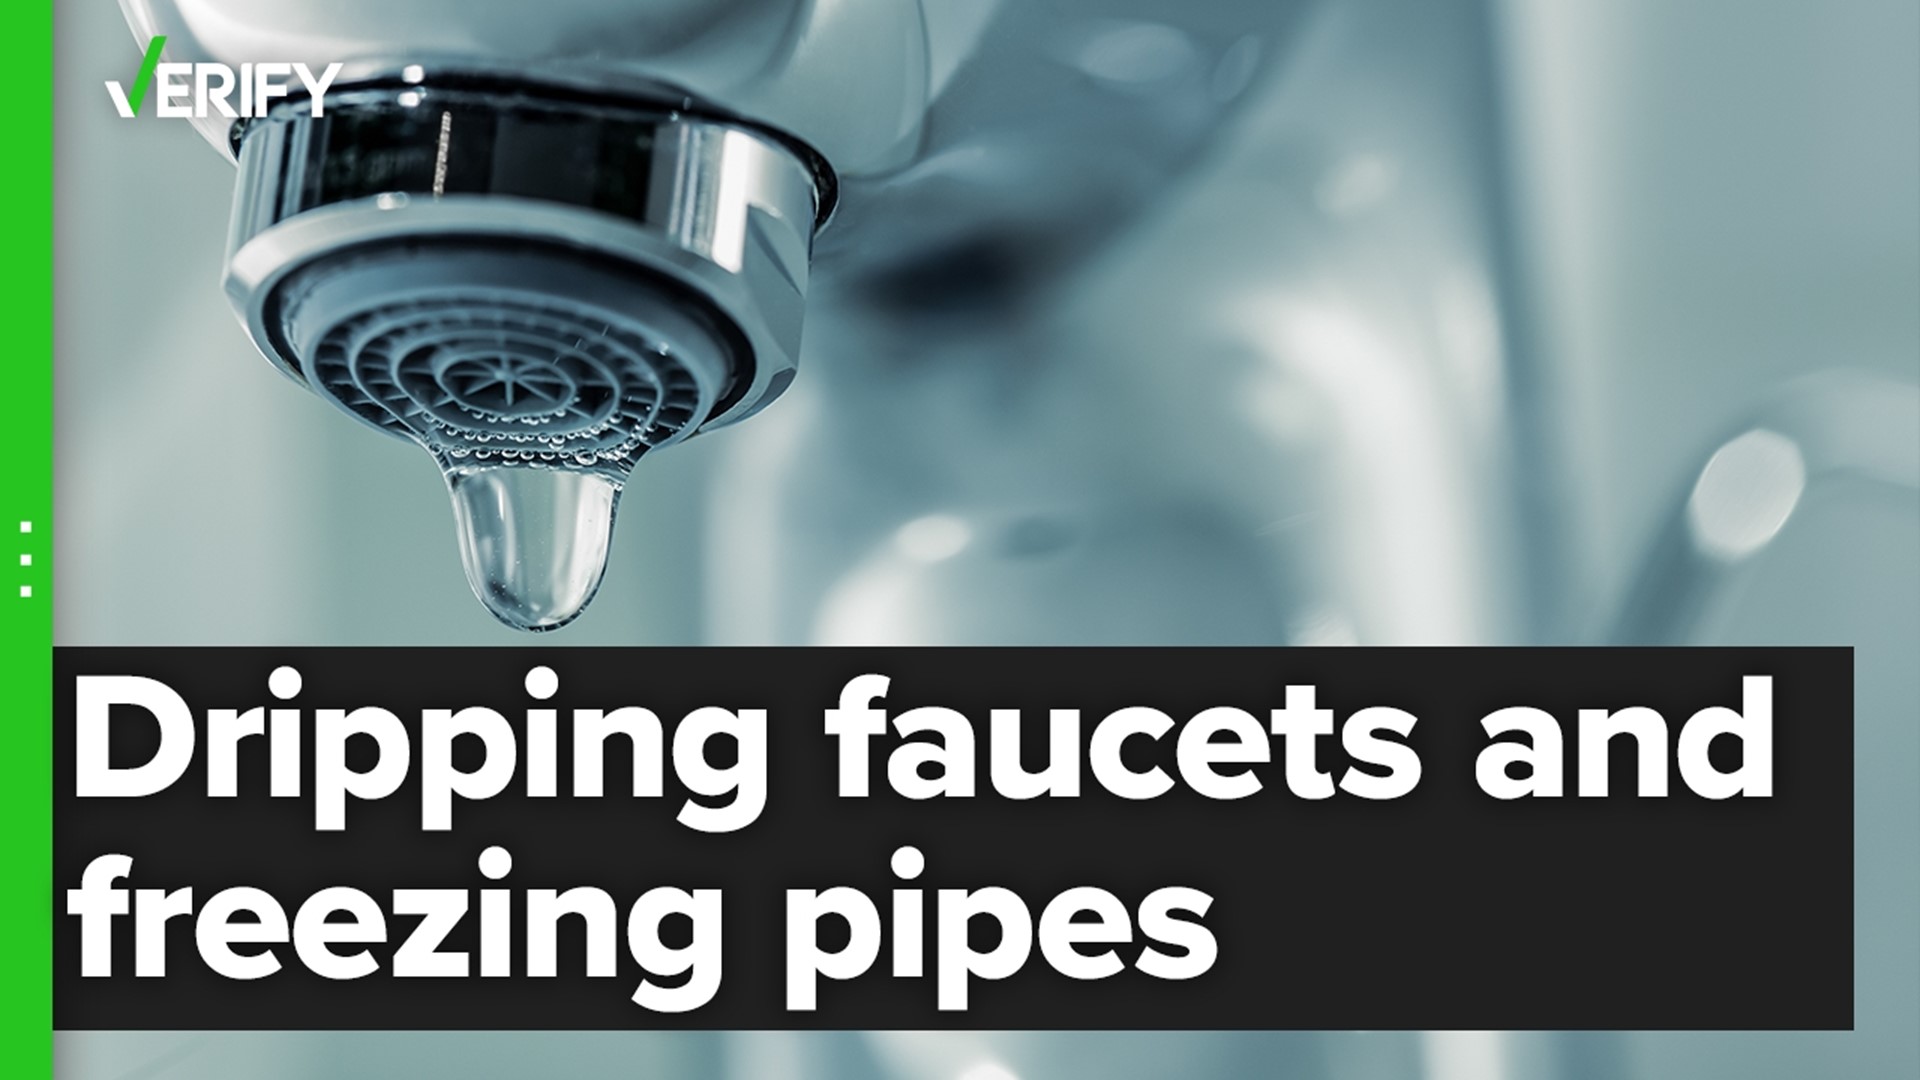 Frozen weather can cause pipes to burst, but you can reduce the likelihood of that happening by letting your faucets drip.